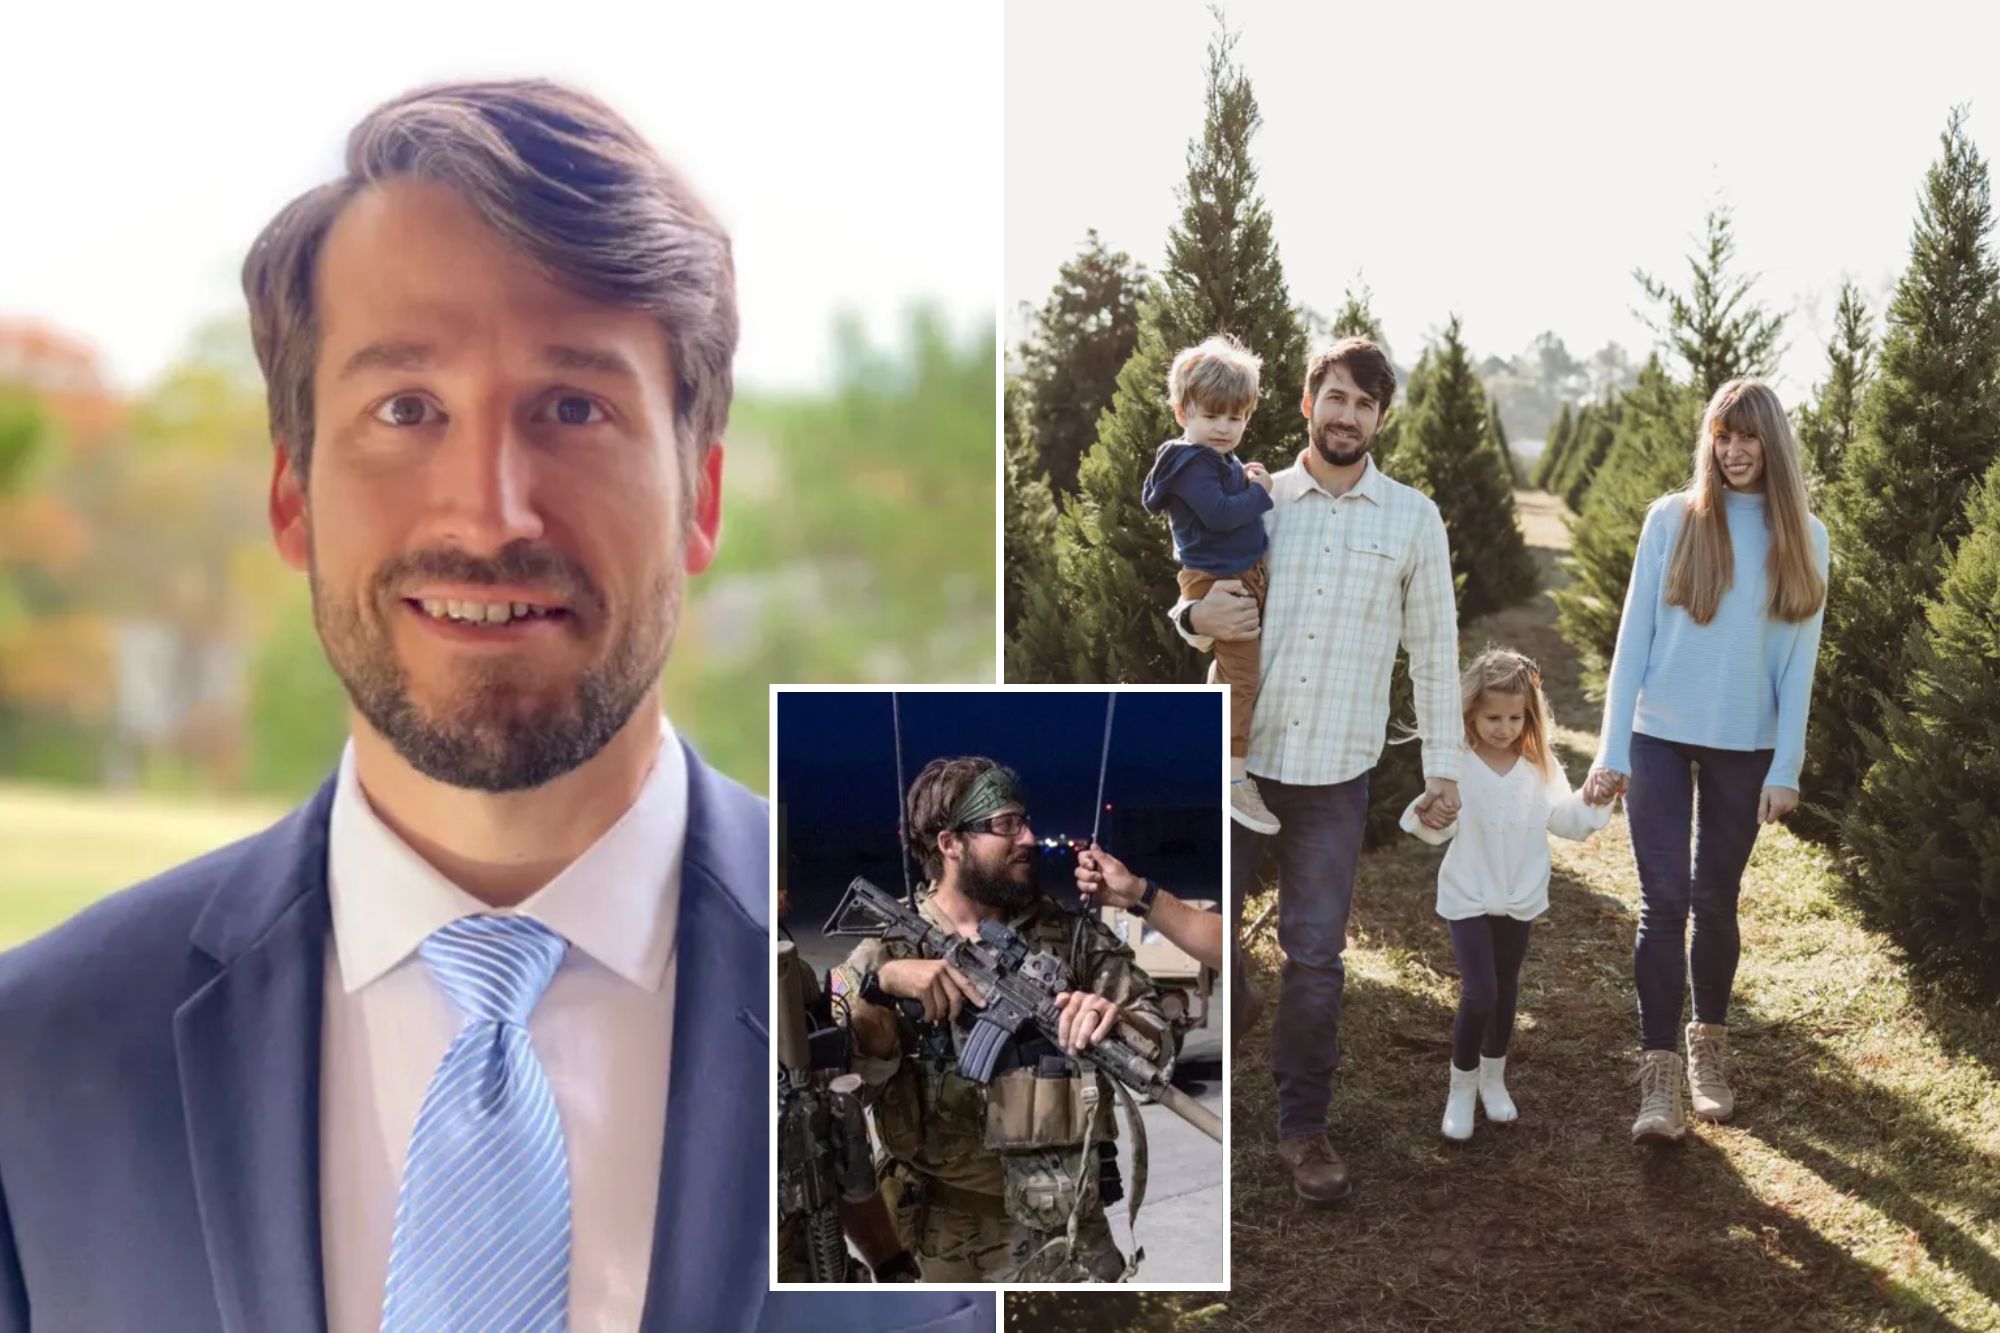 Wall Street banker and former soldier dead at 35 wanted new job over grueling 100-hour work weeks